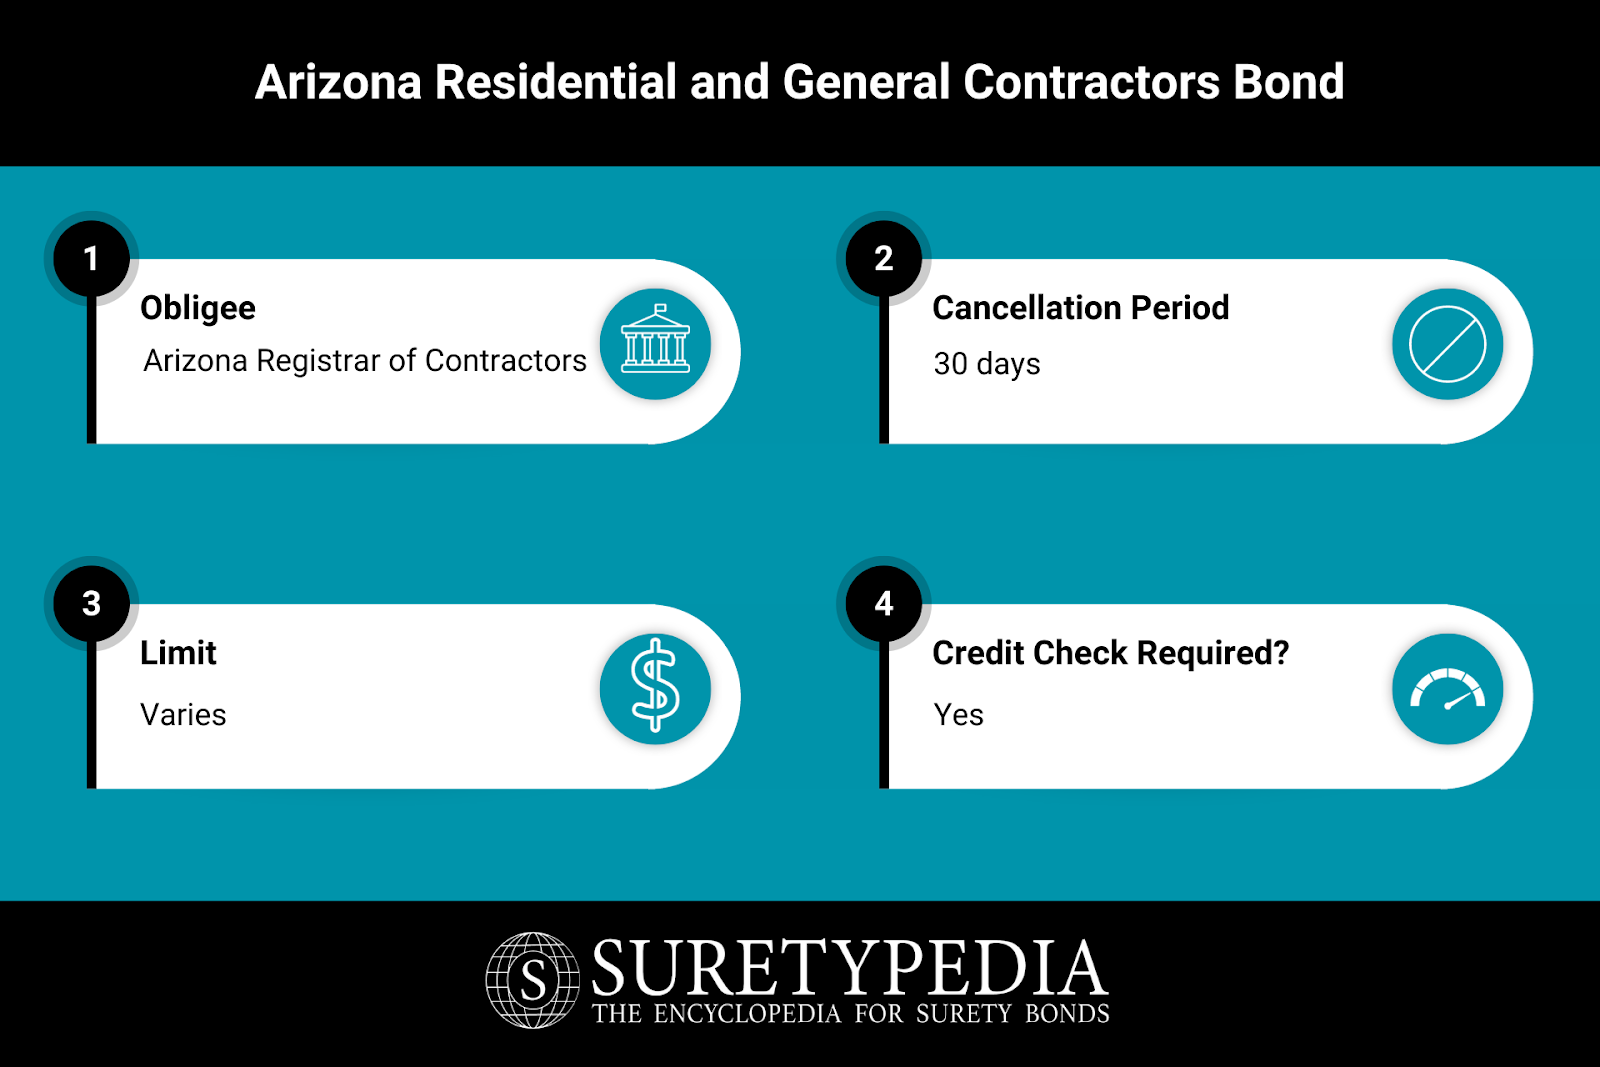 Arizona Residential and General Contractors Bond